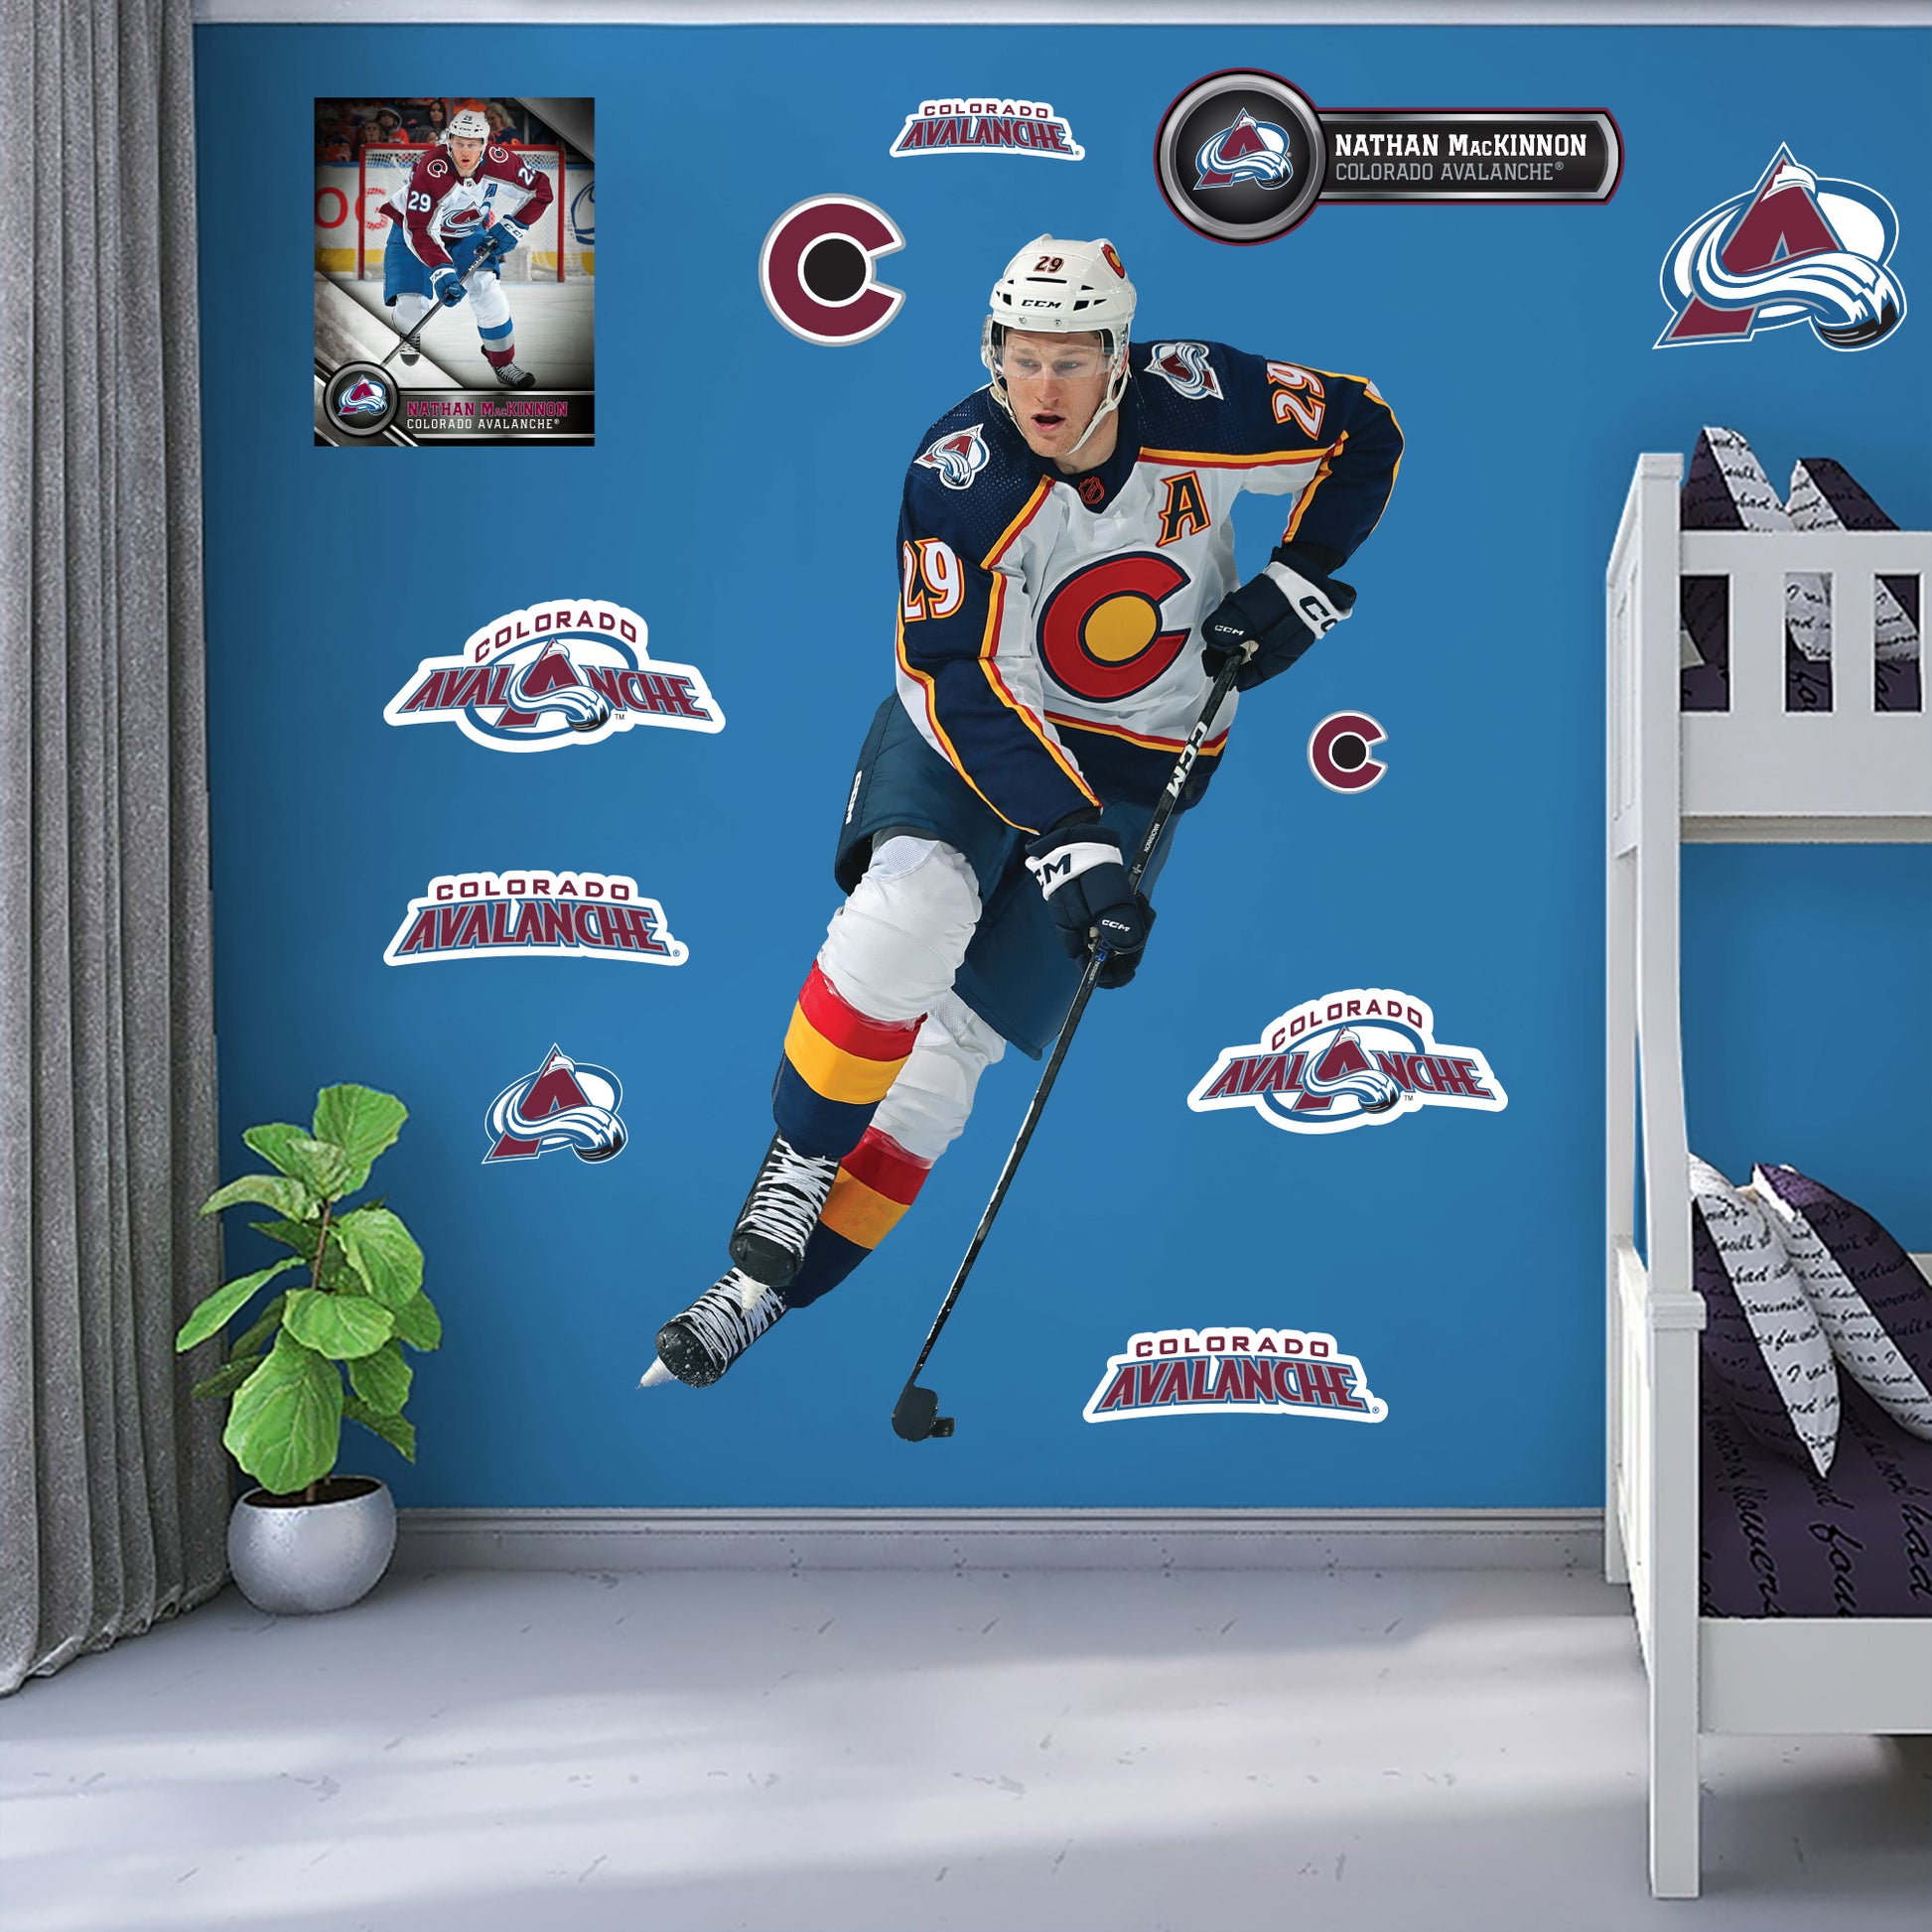 Colorado Avalanche: The Future of Ads on NHL Jerseys